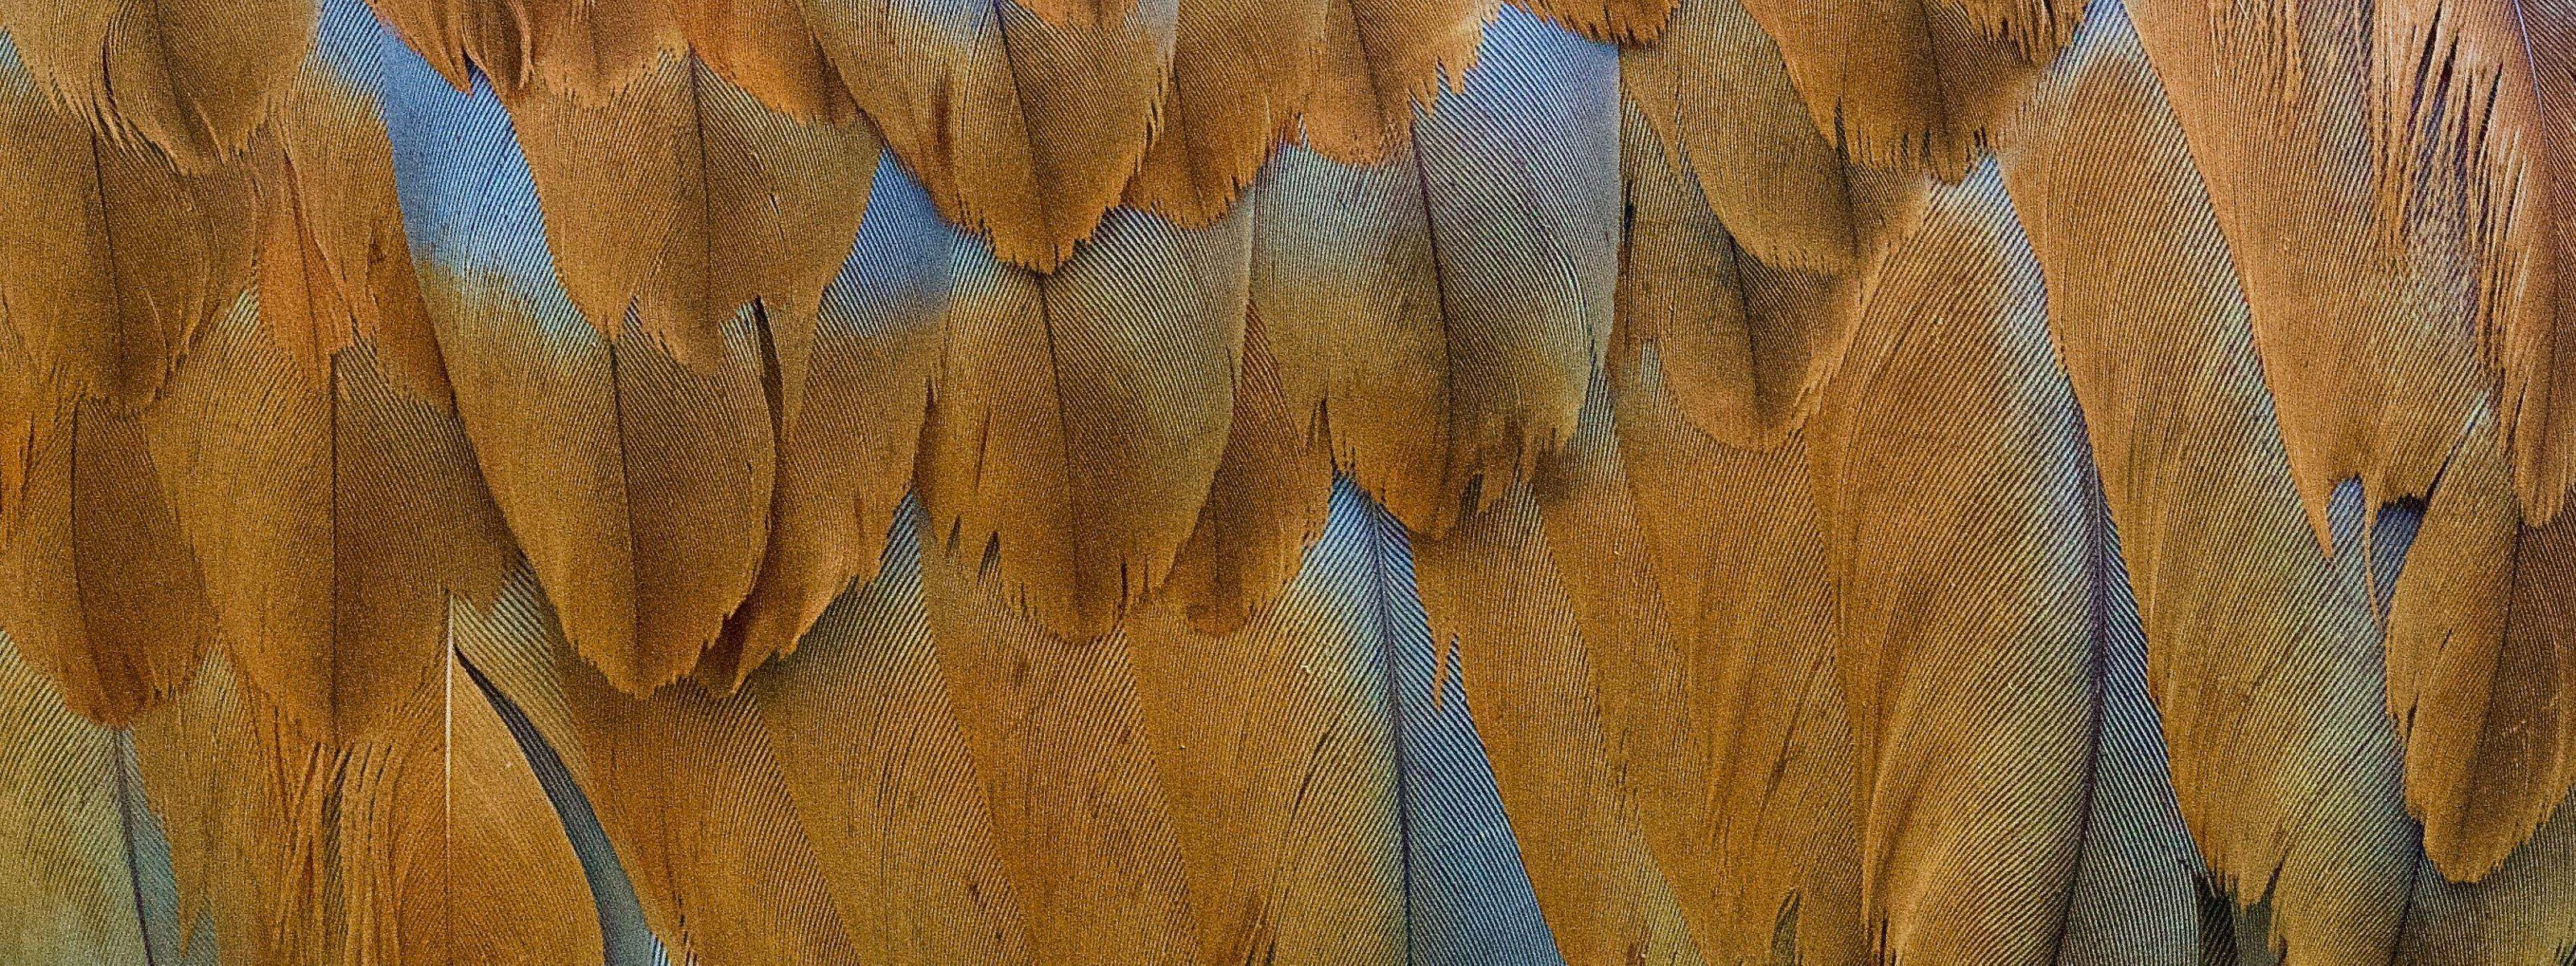 A close up of gold and gray sandhill crane feathers